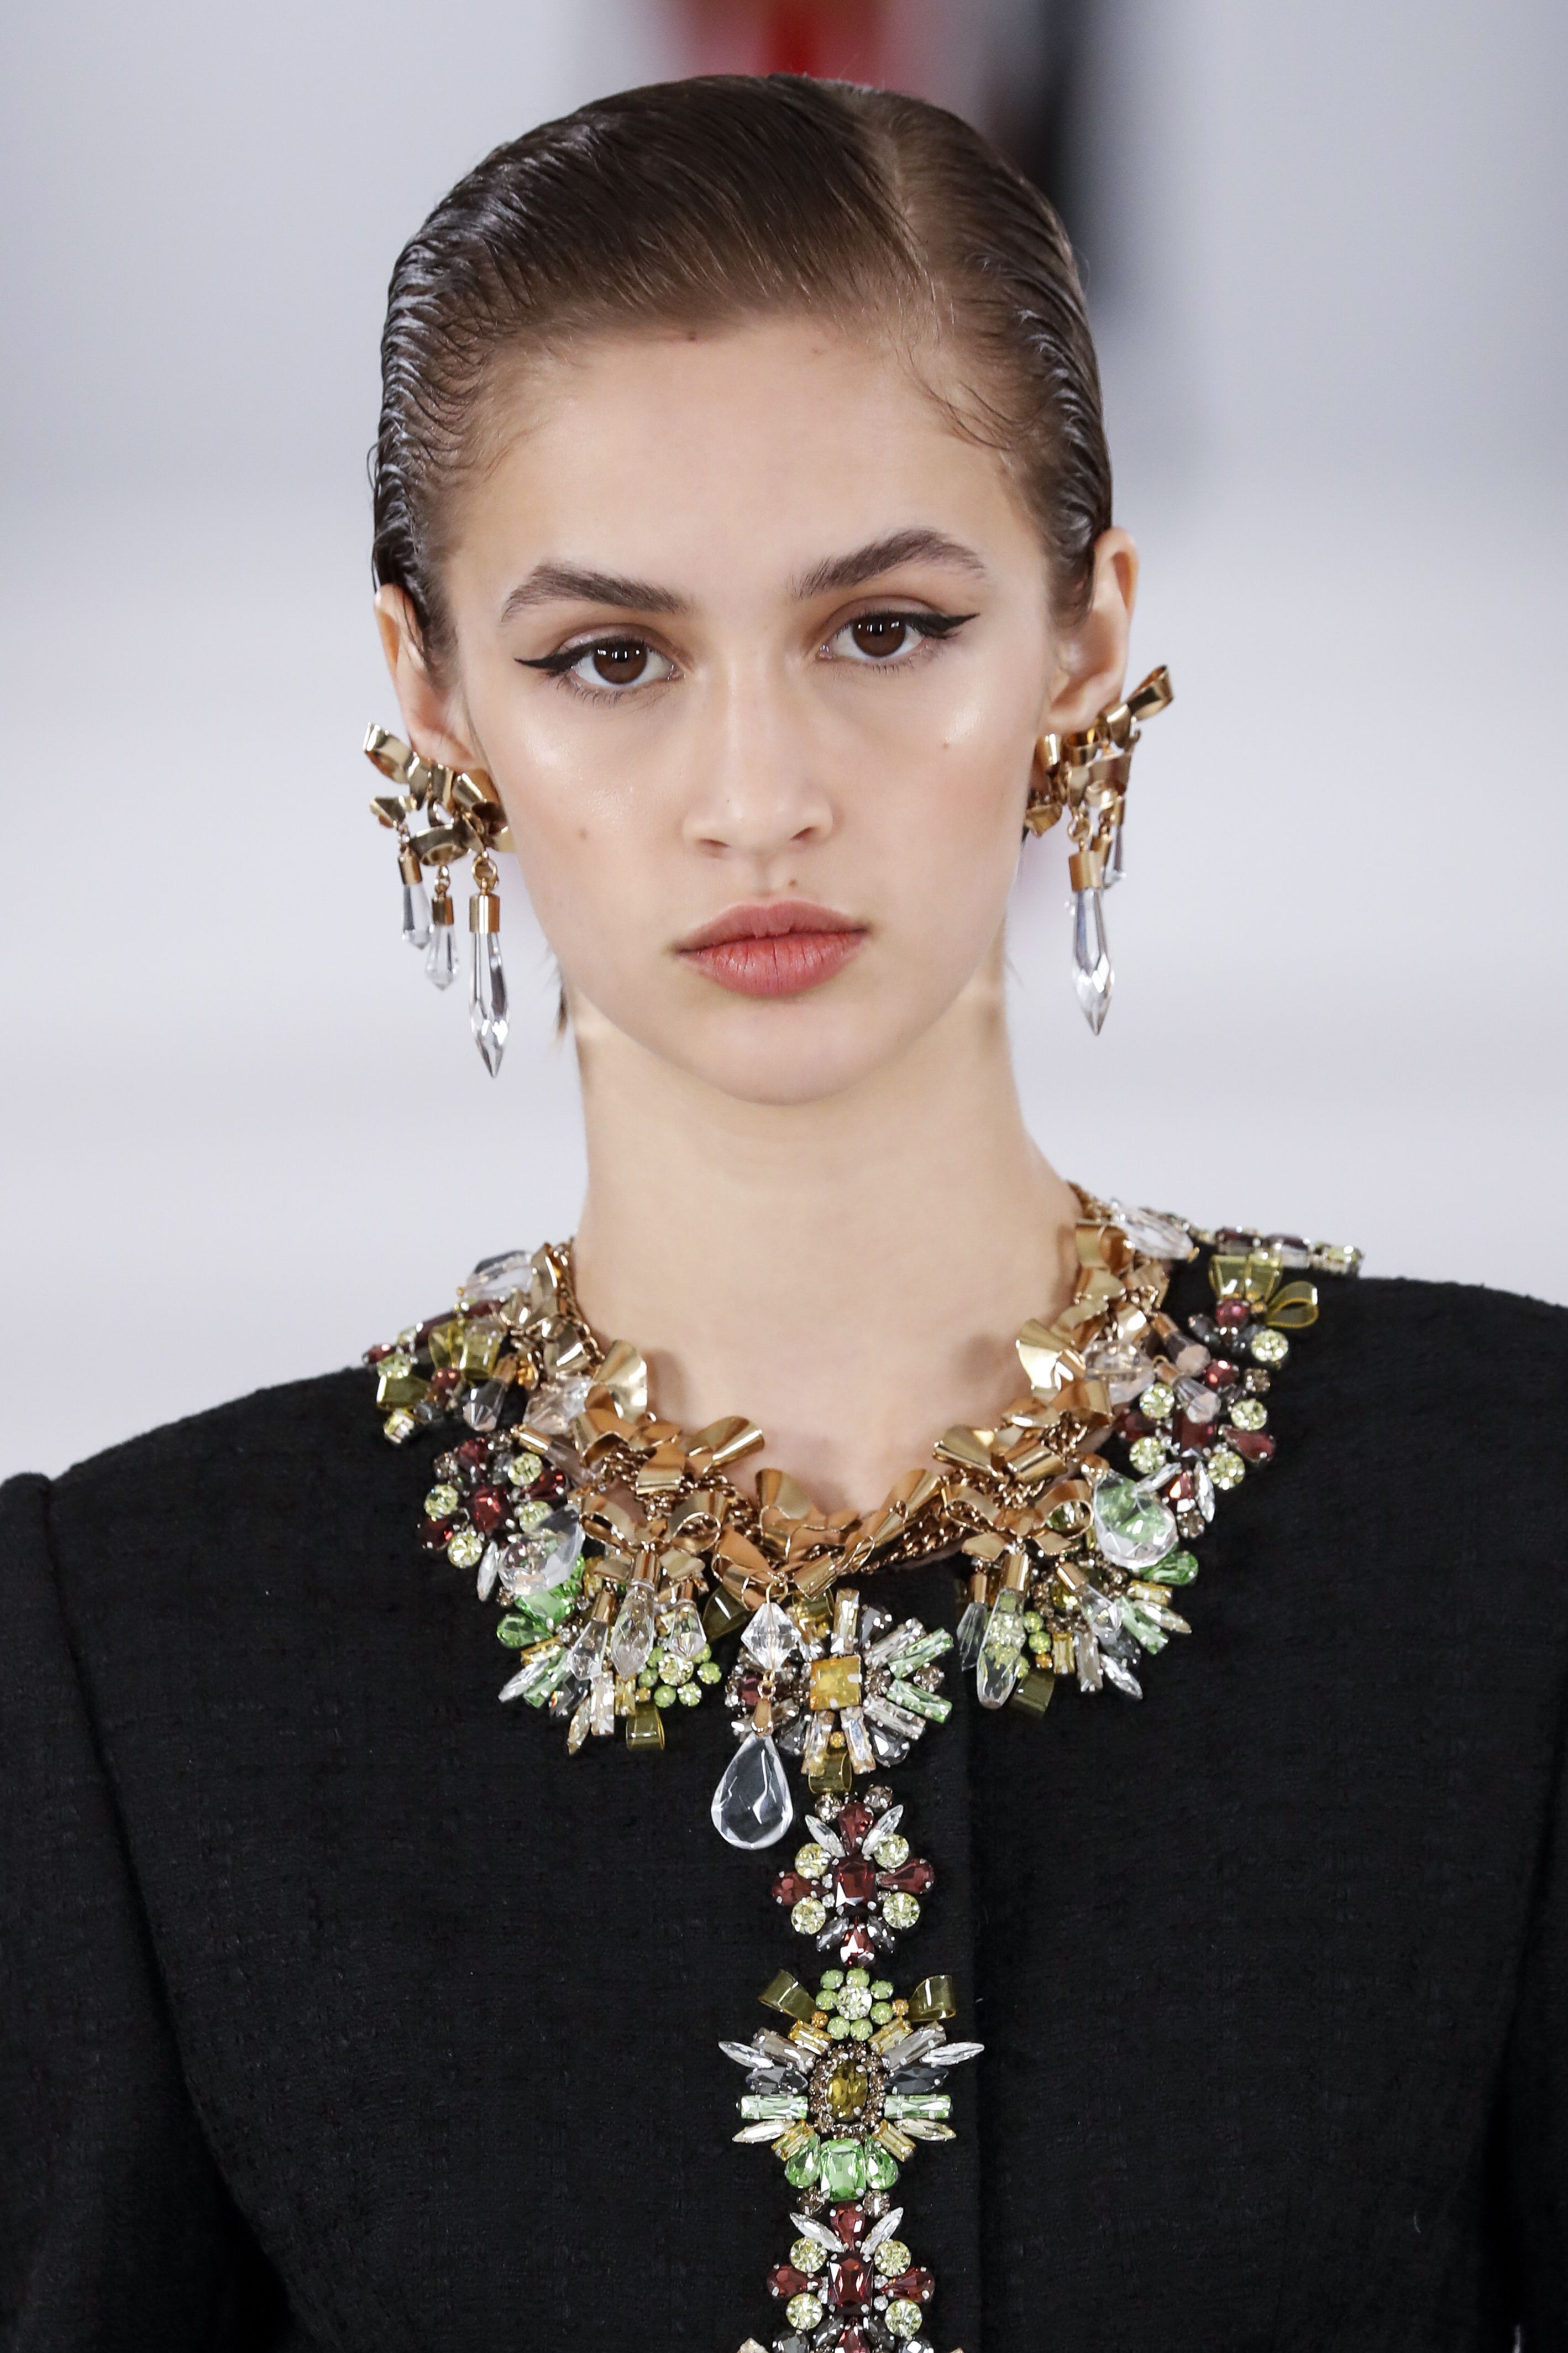 10 Jewelry Trends That Will Be Big For Winter 2022-2023